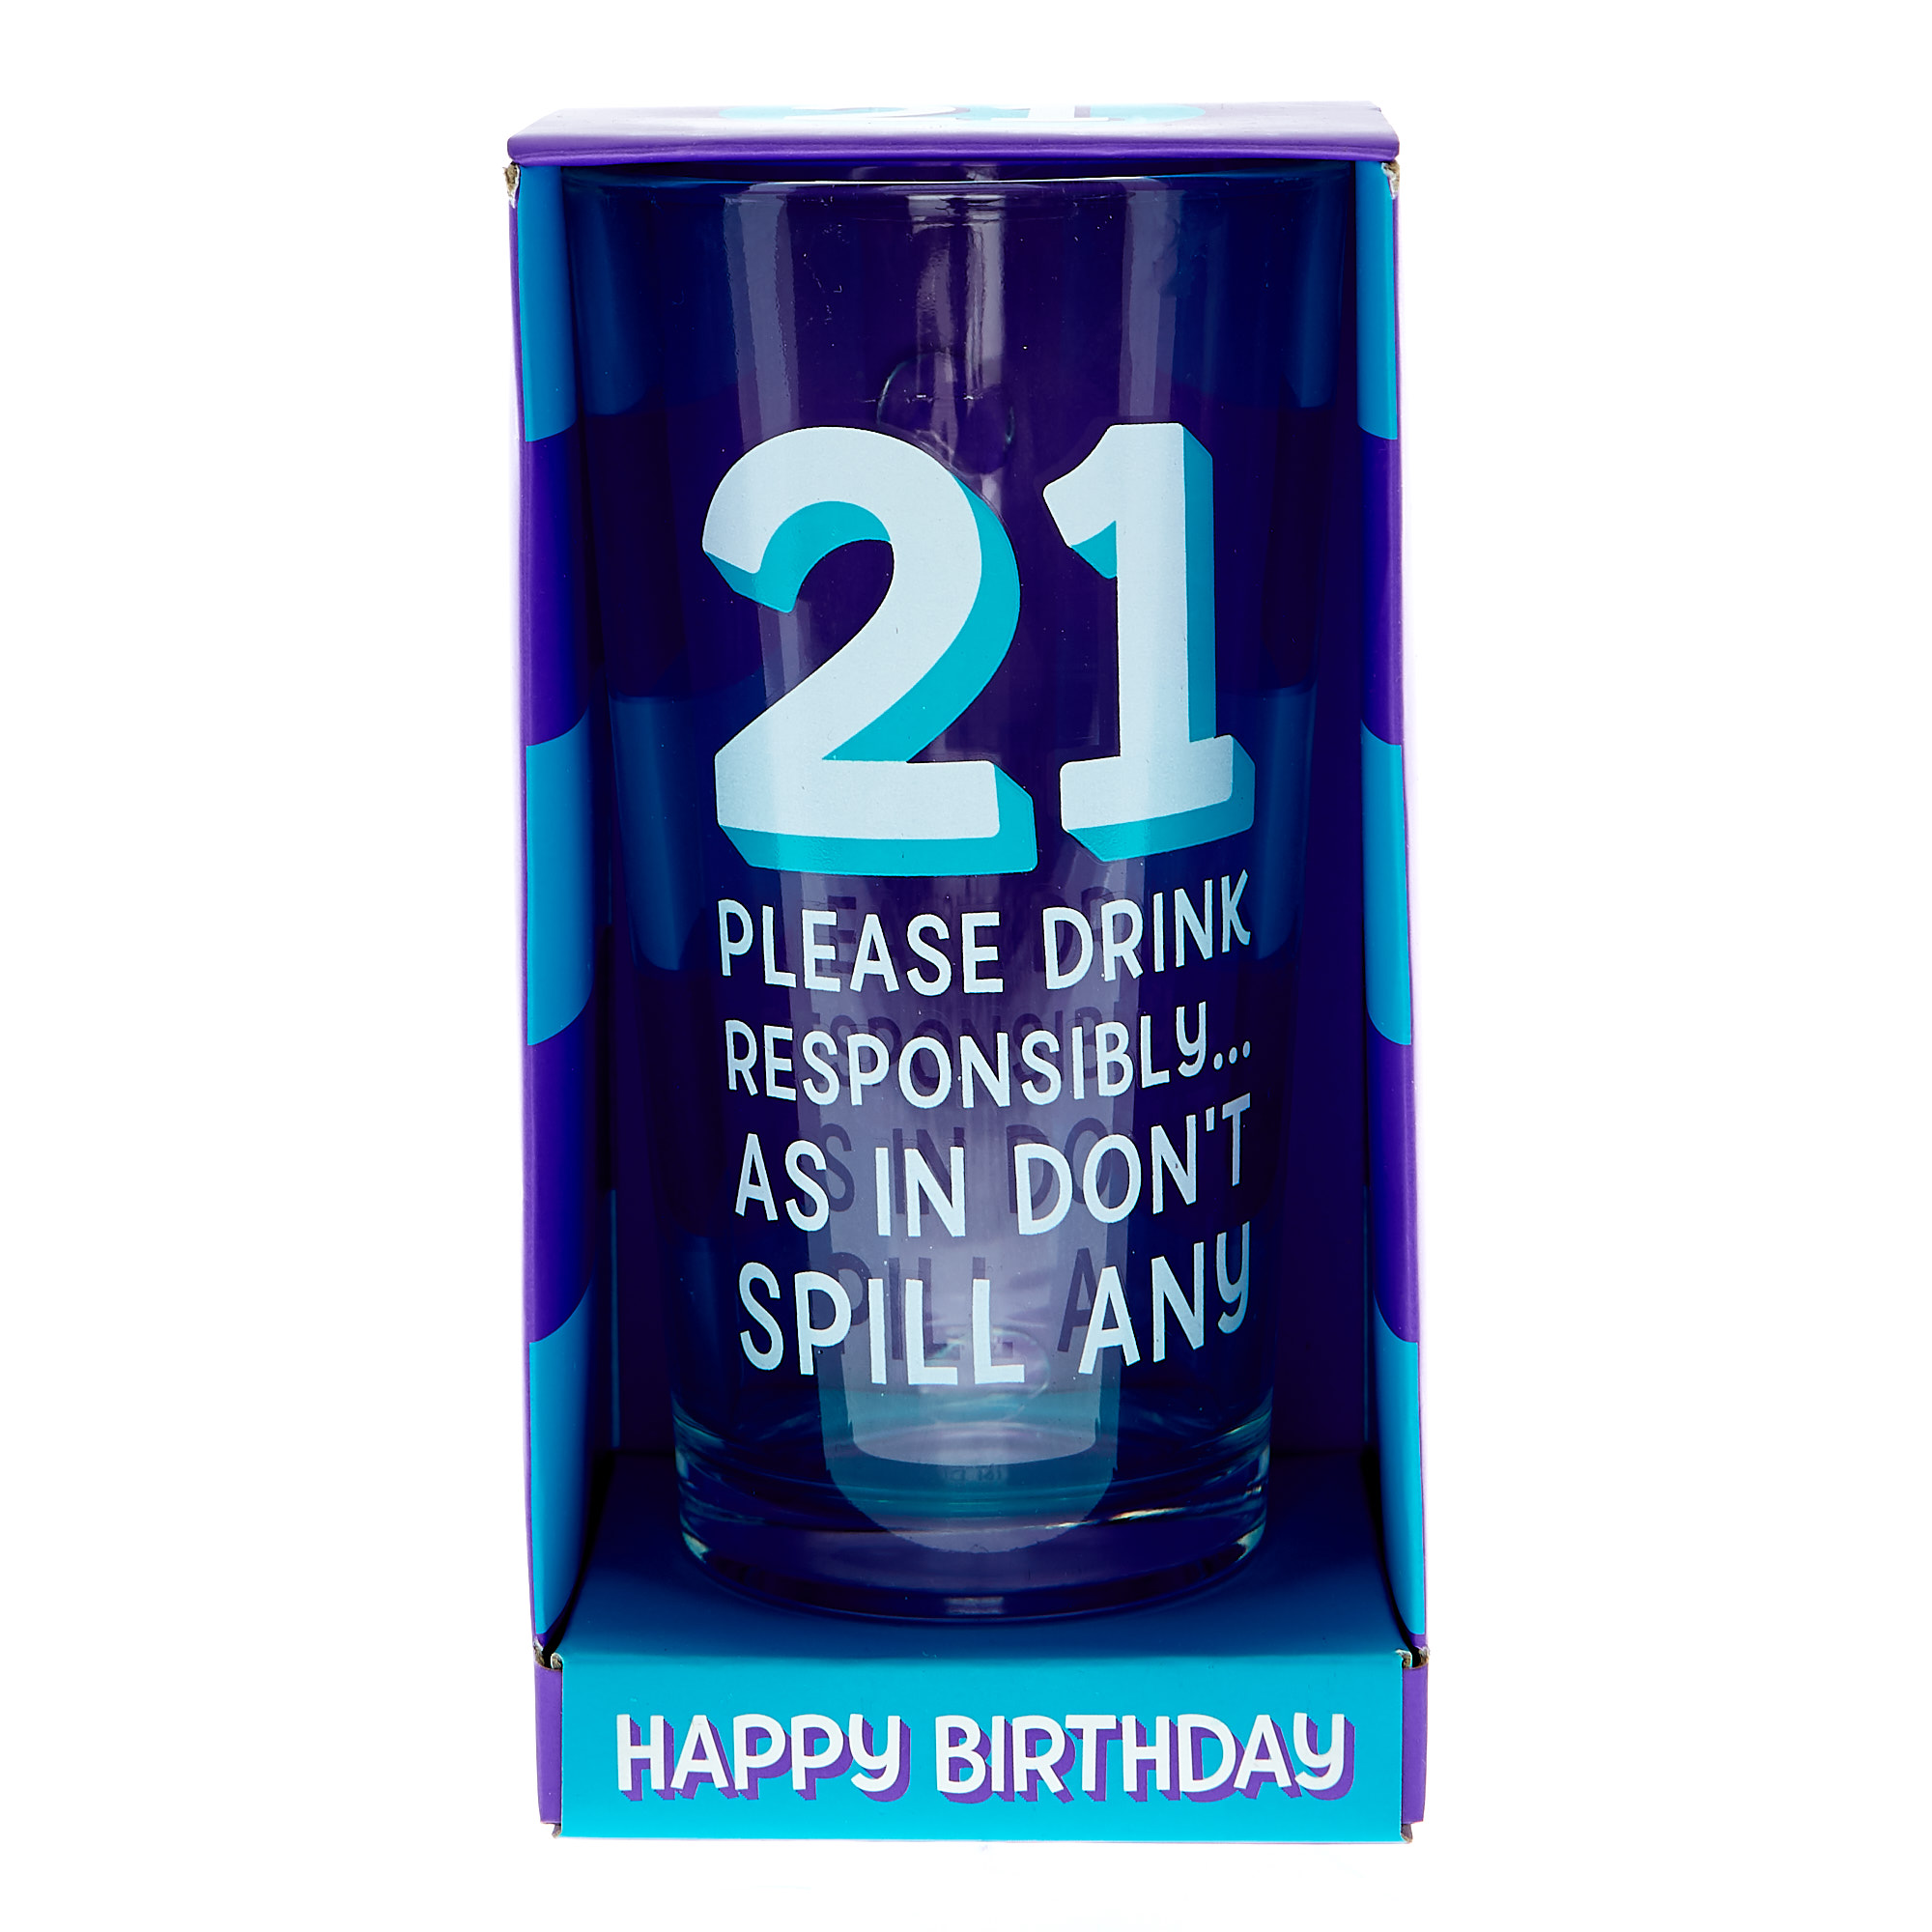 21st Birthday Pint Glass - Don't Spill Any!